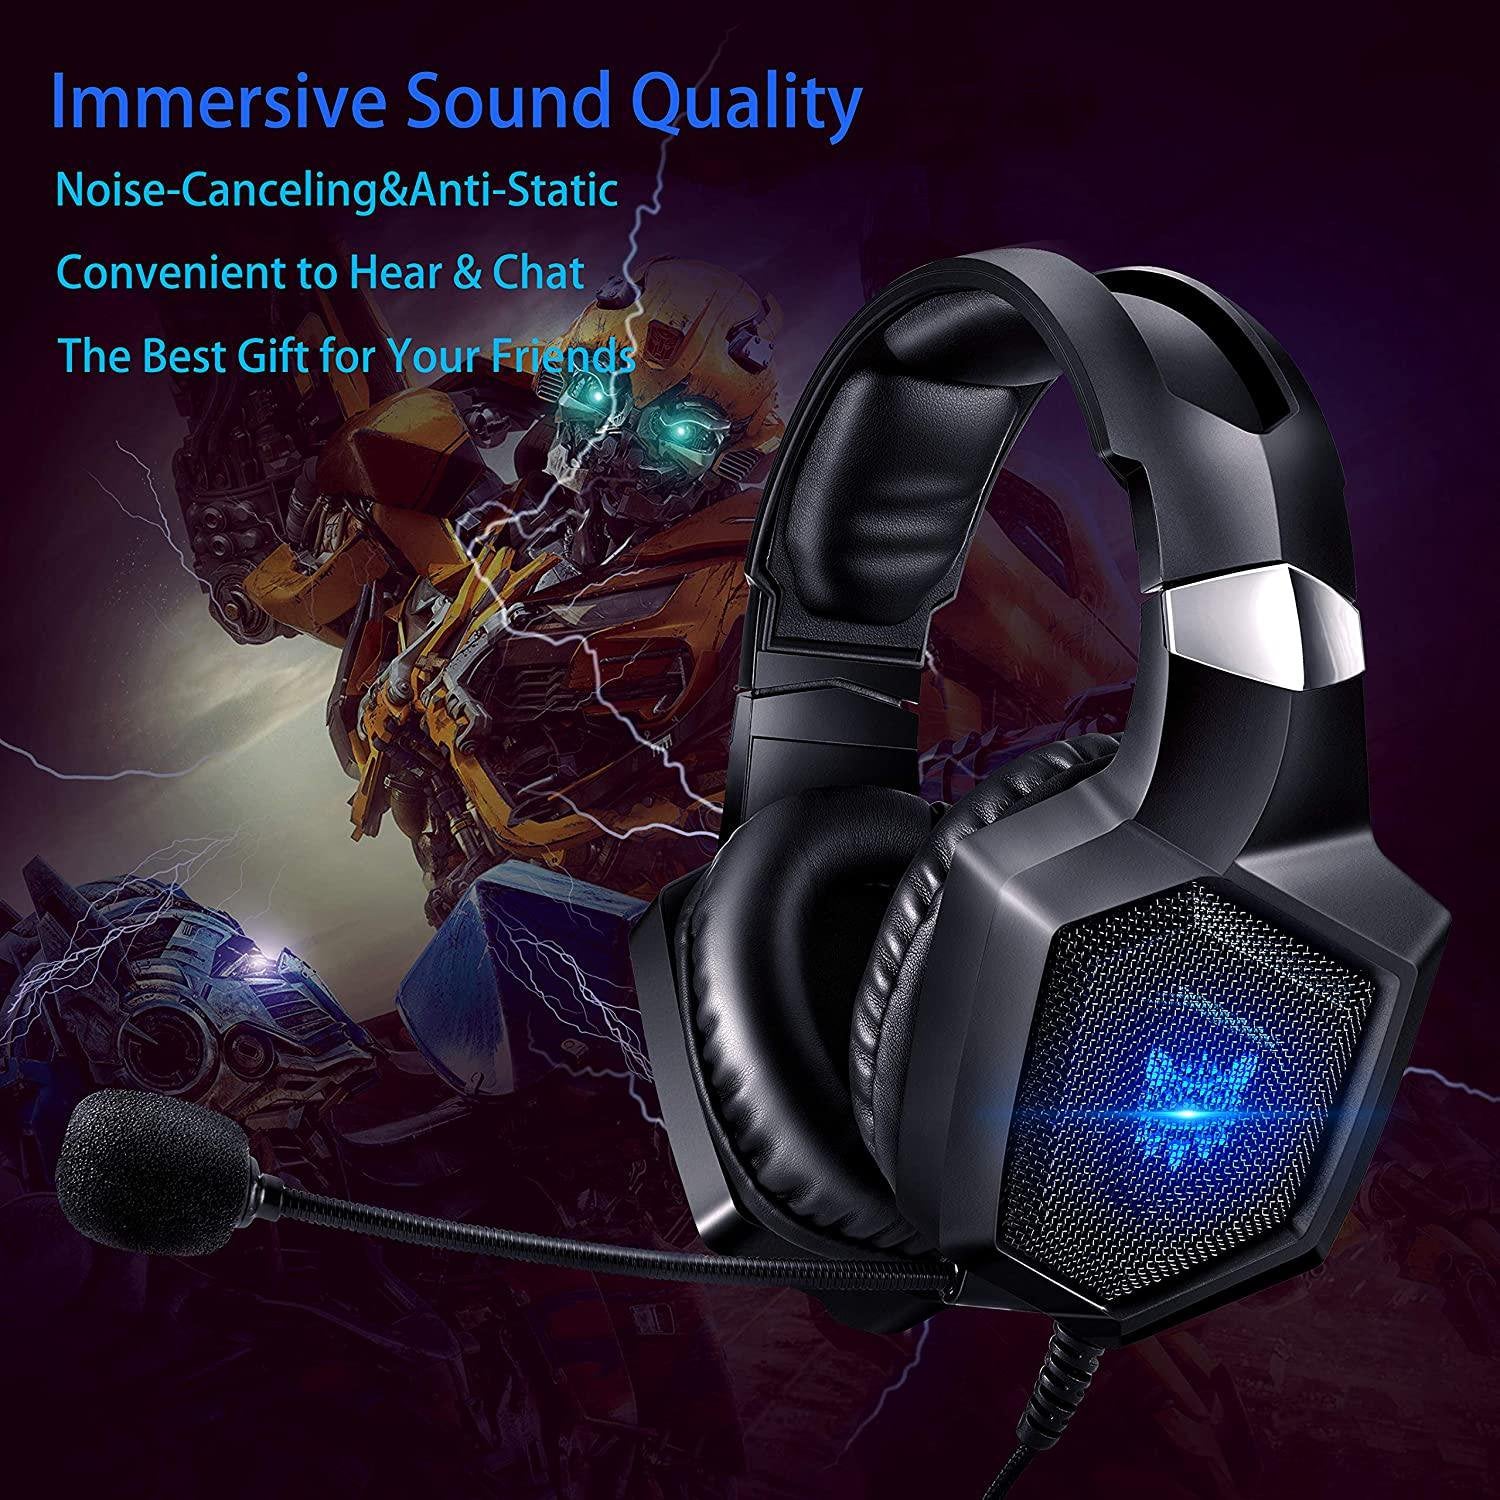 ONIKUMA K8 Gaming Headsets, Surround Stereo Sound Gaming Headphones with Flexible Mic LED Lights, Over-Ear Noise Cancelling Headsets for PS4, Xbox One, PS5, Nintendo Switch, PC, Mac, Mobile